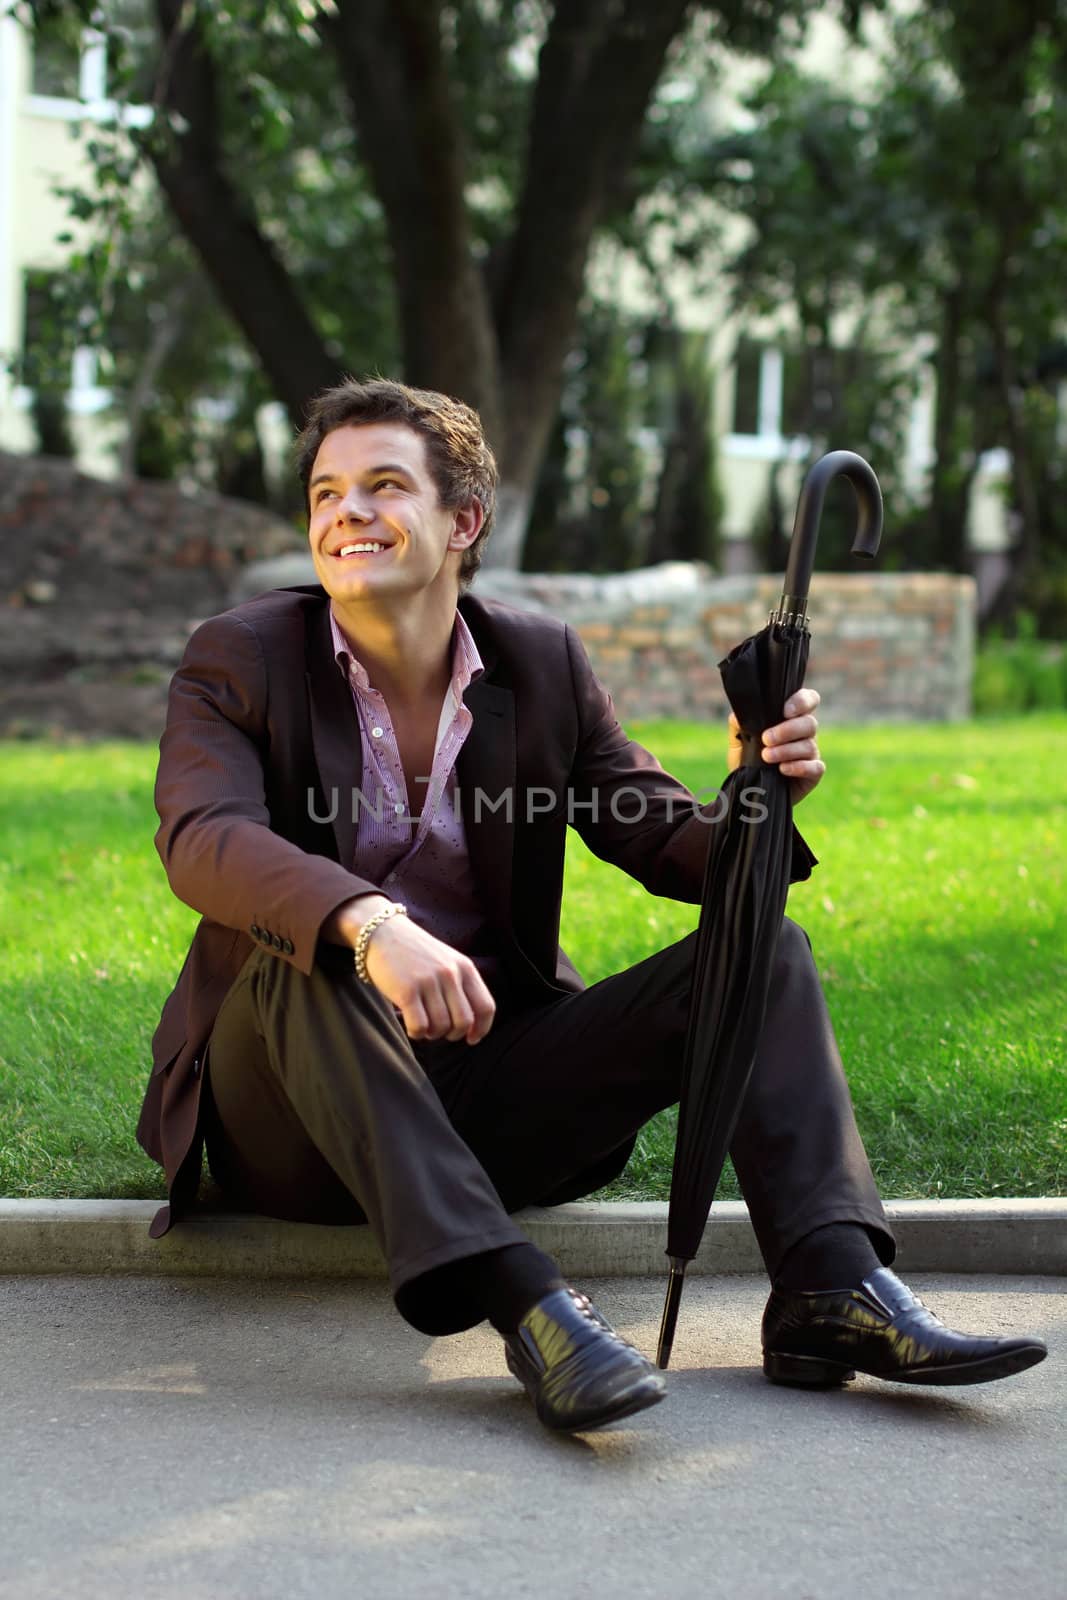 Smiling man sitting on the grass by Legioner476